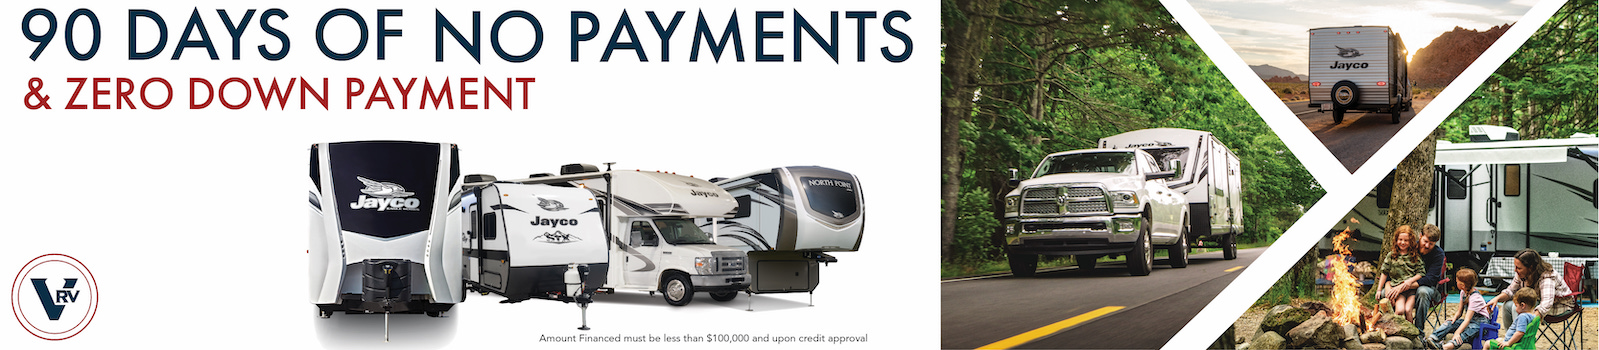 90 Days No Payments